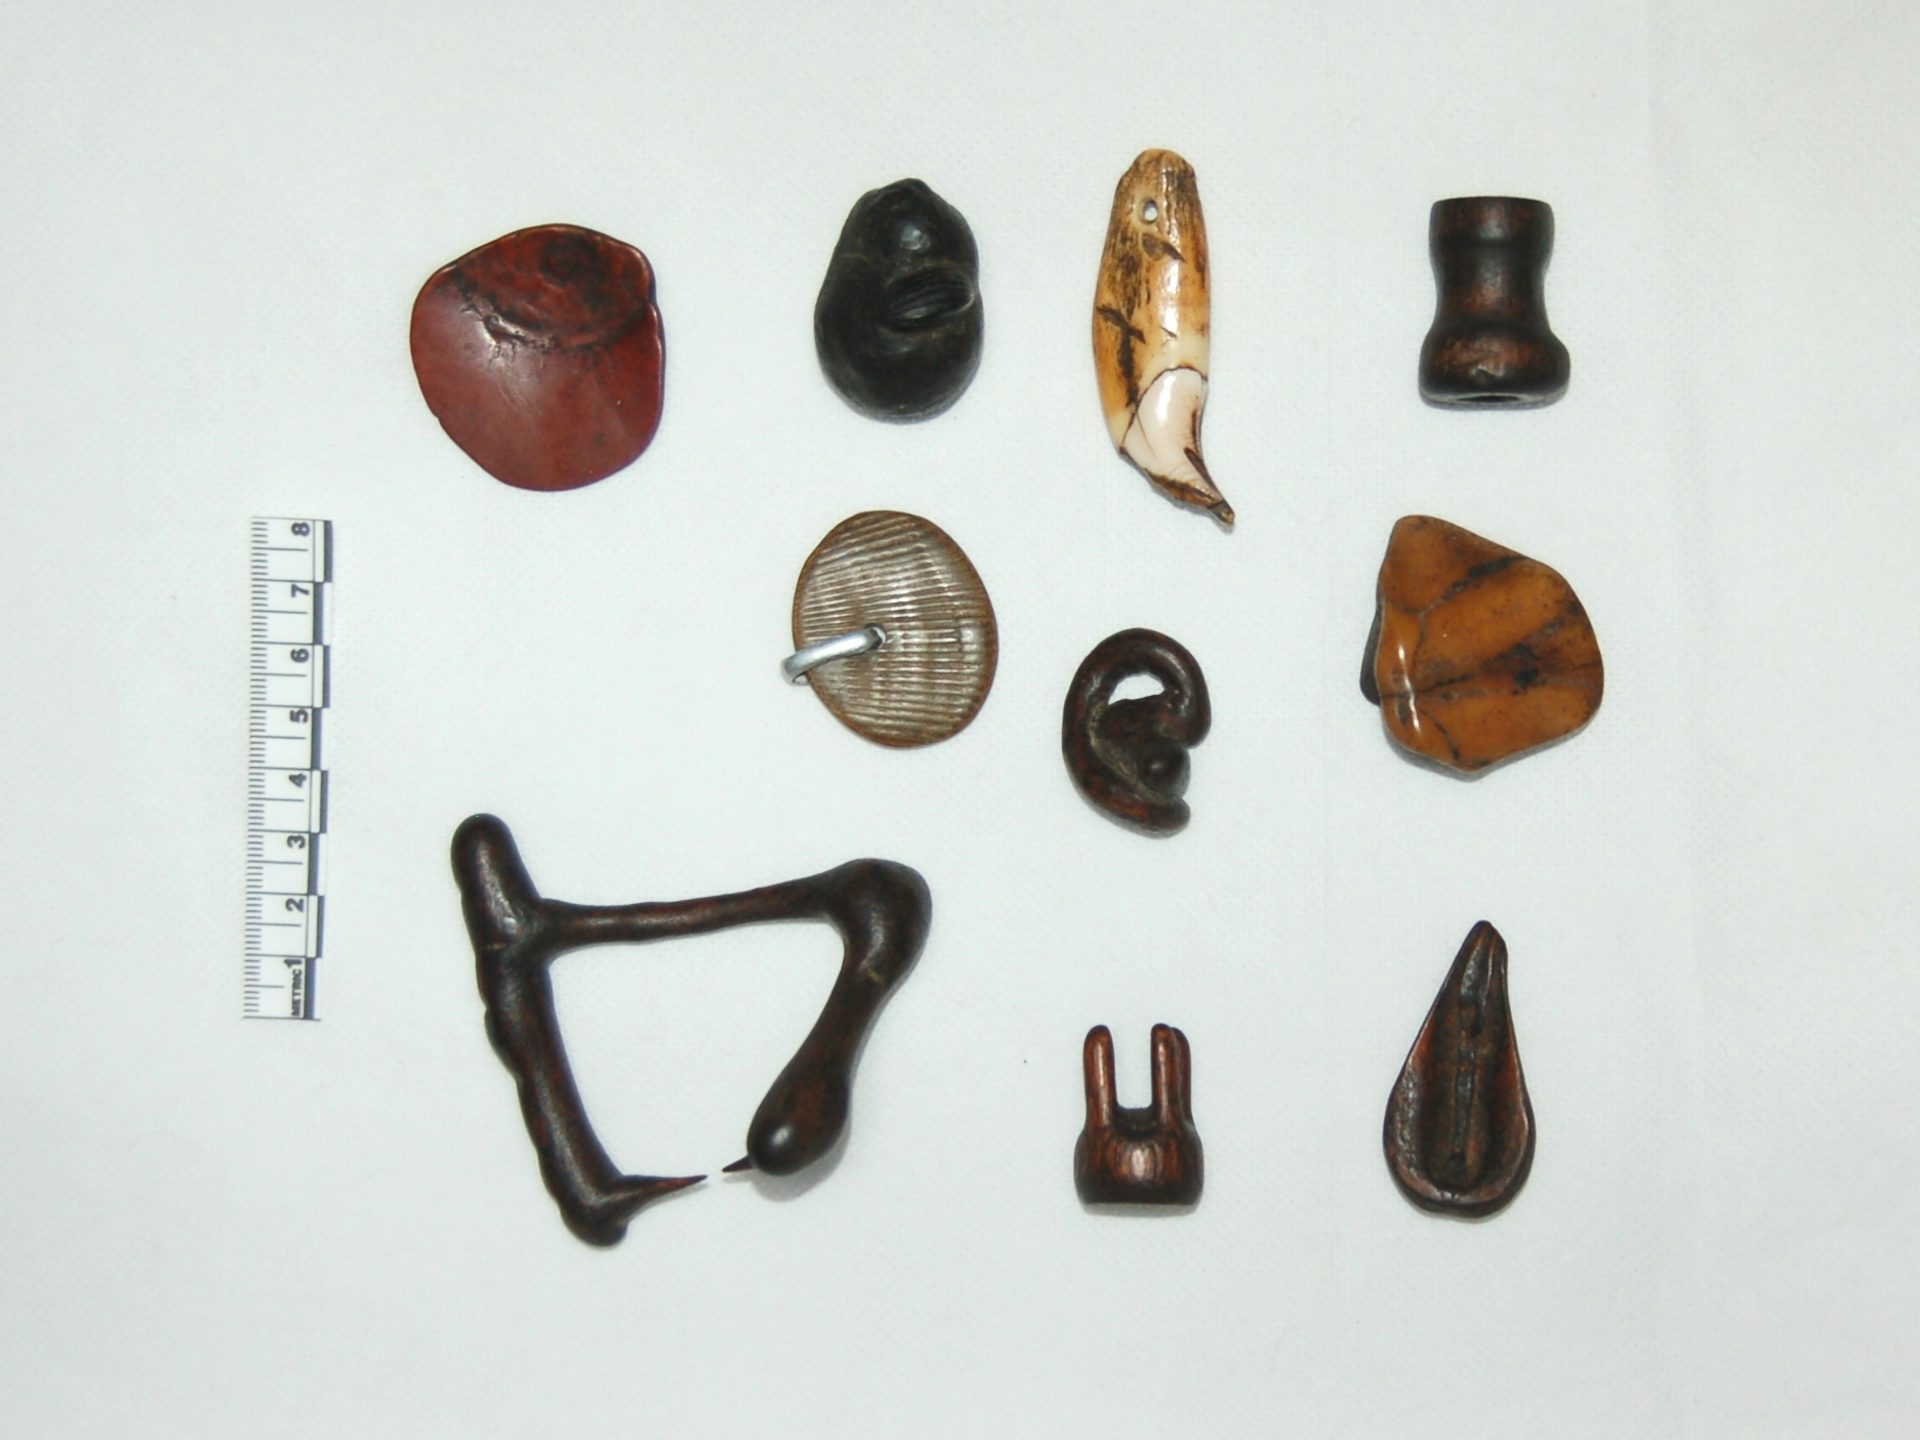 Ifa Divination Objects, by Yoruba artist (19th century).